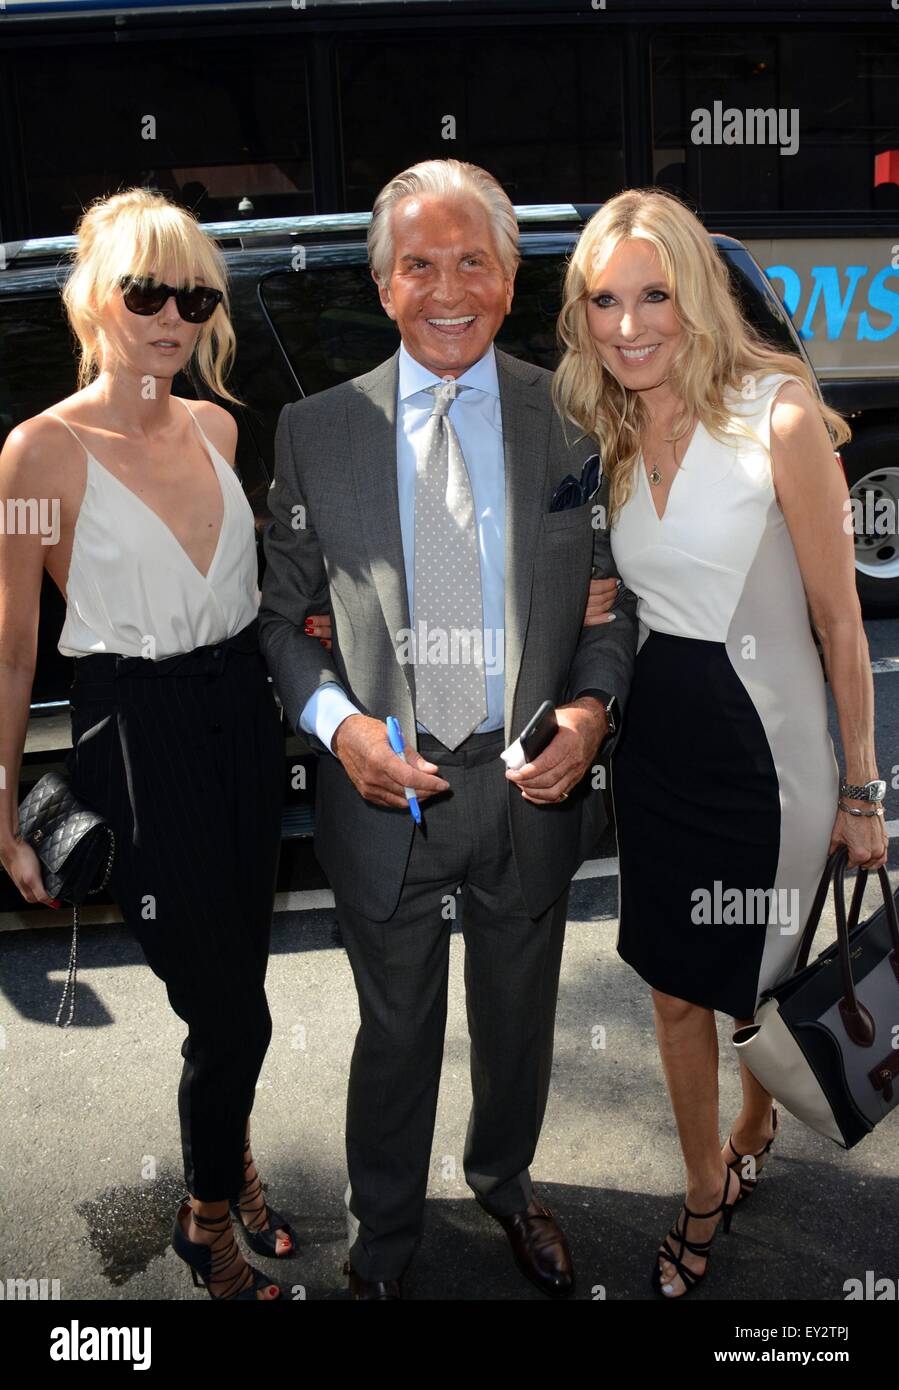 New York, NY, USA. 20th July, 2015. Kimberly Stewart, George Hamilton, Alana Stewart, at the NBC Today Show out and about for Celebrity Candids - MON, New York, NY July 20, 2015. Credit:  Derek Storm/Everett Collection/Alamy Live News Stock Photo